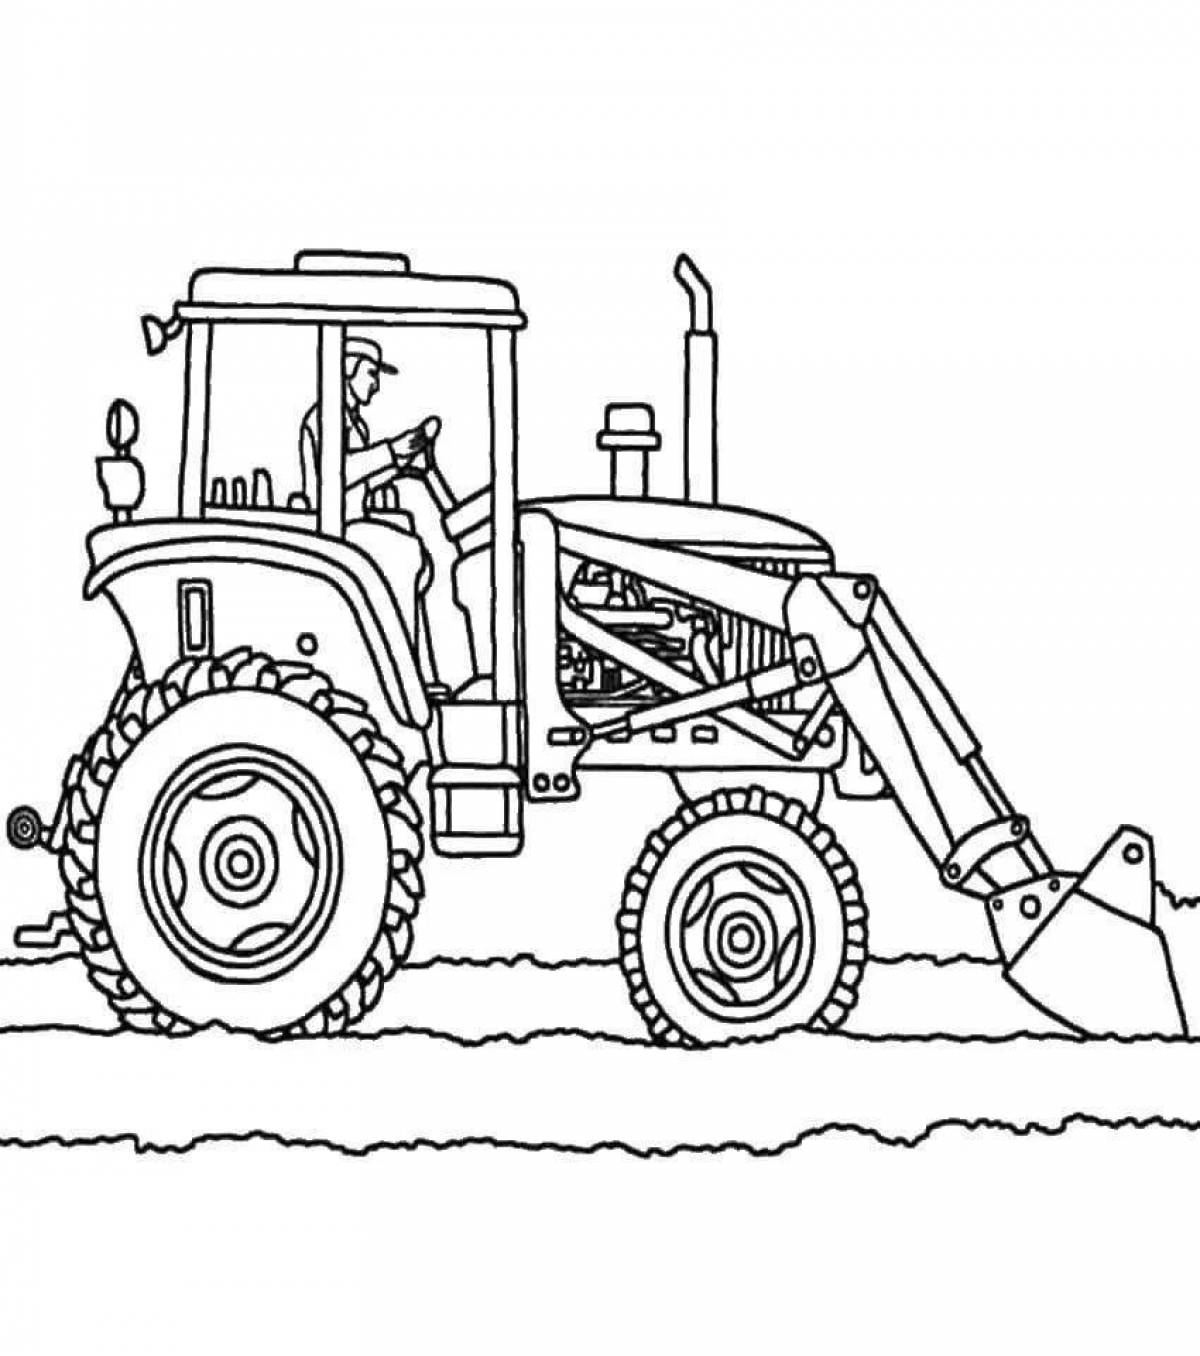 Joyful drawing of a tractor for children